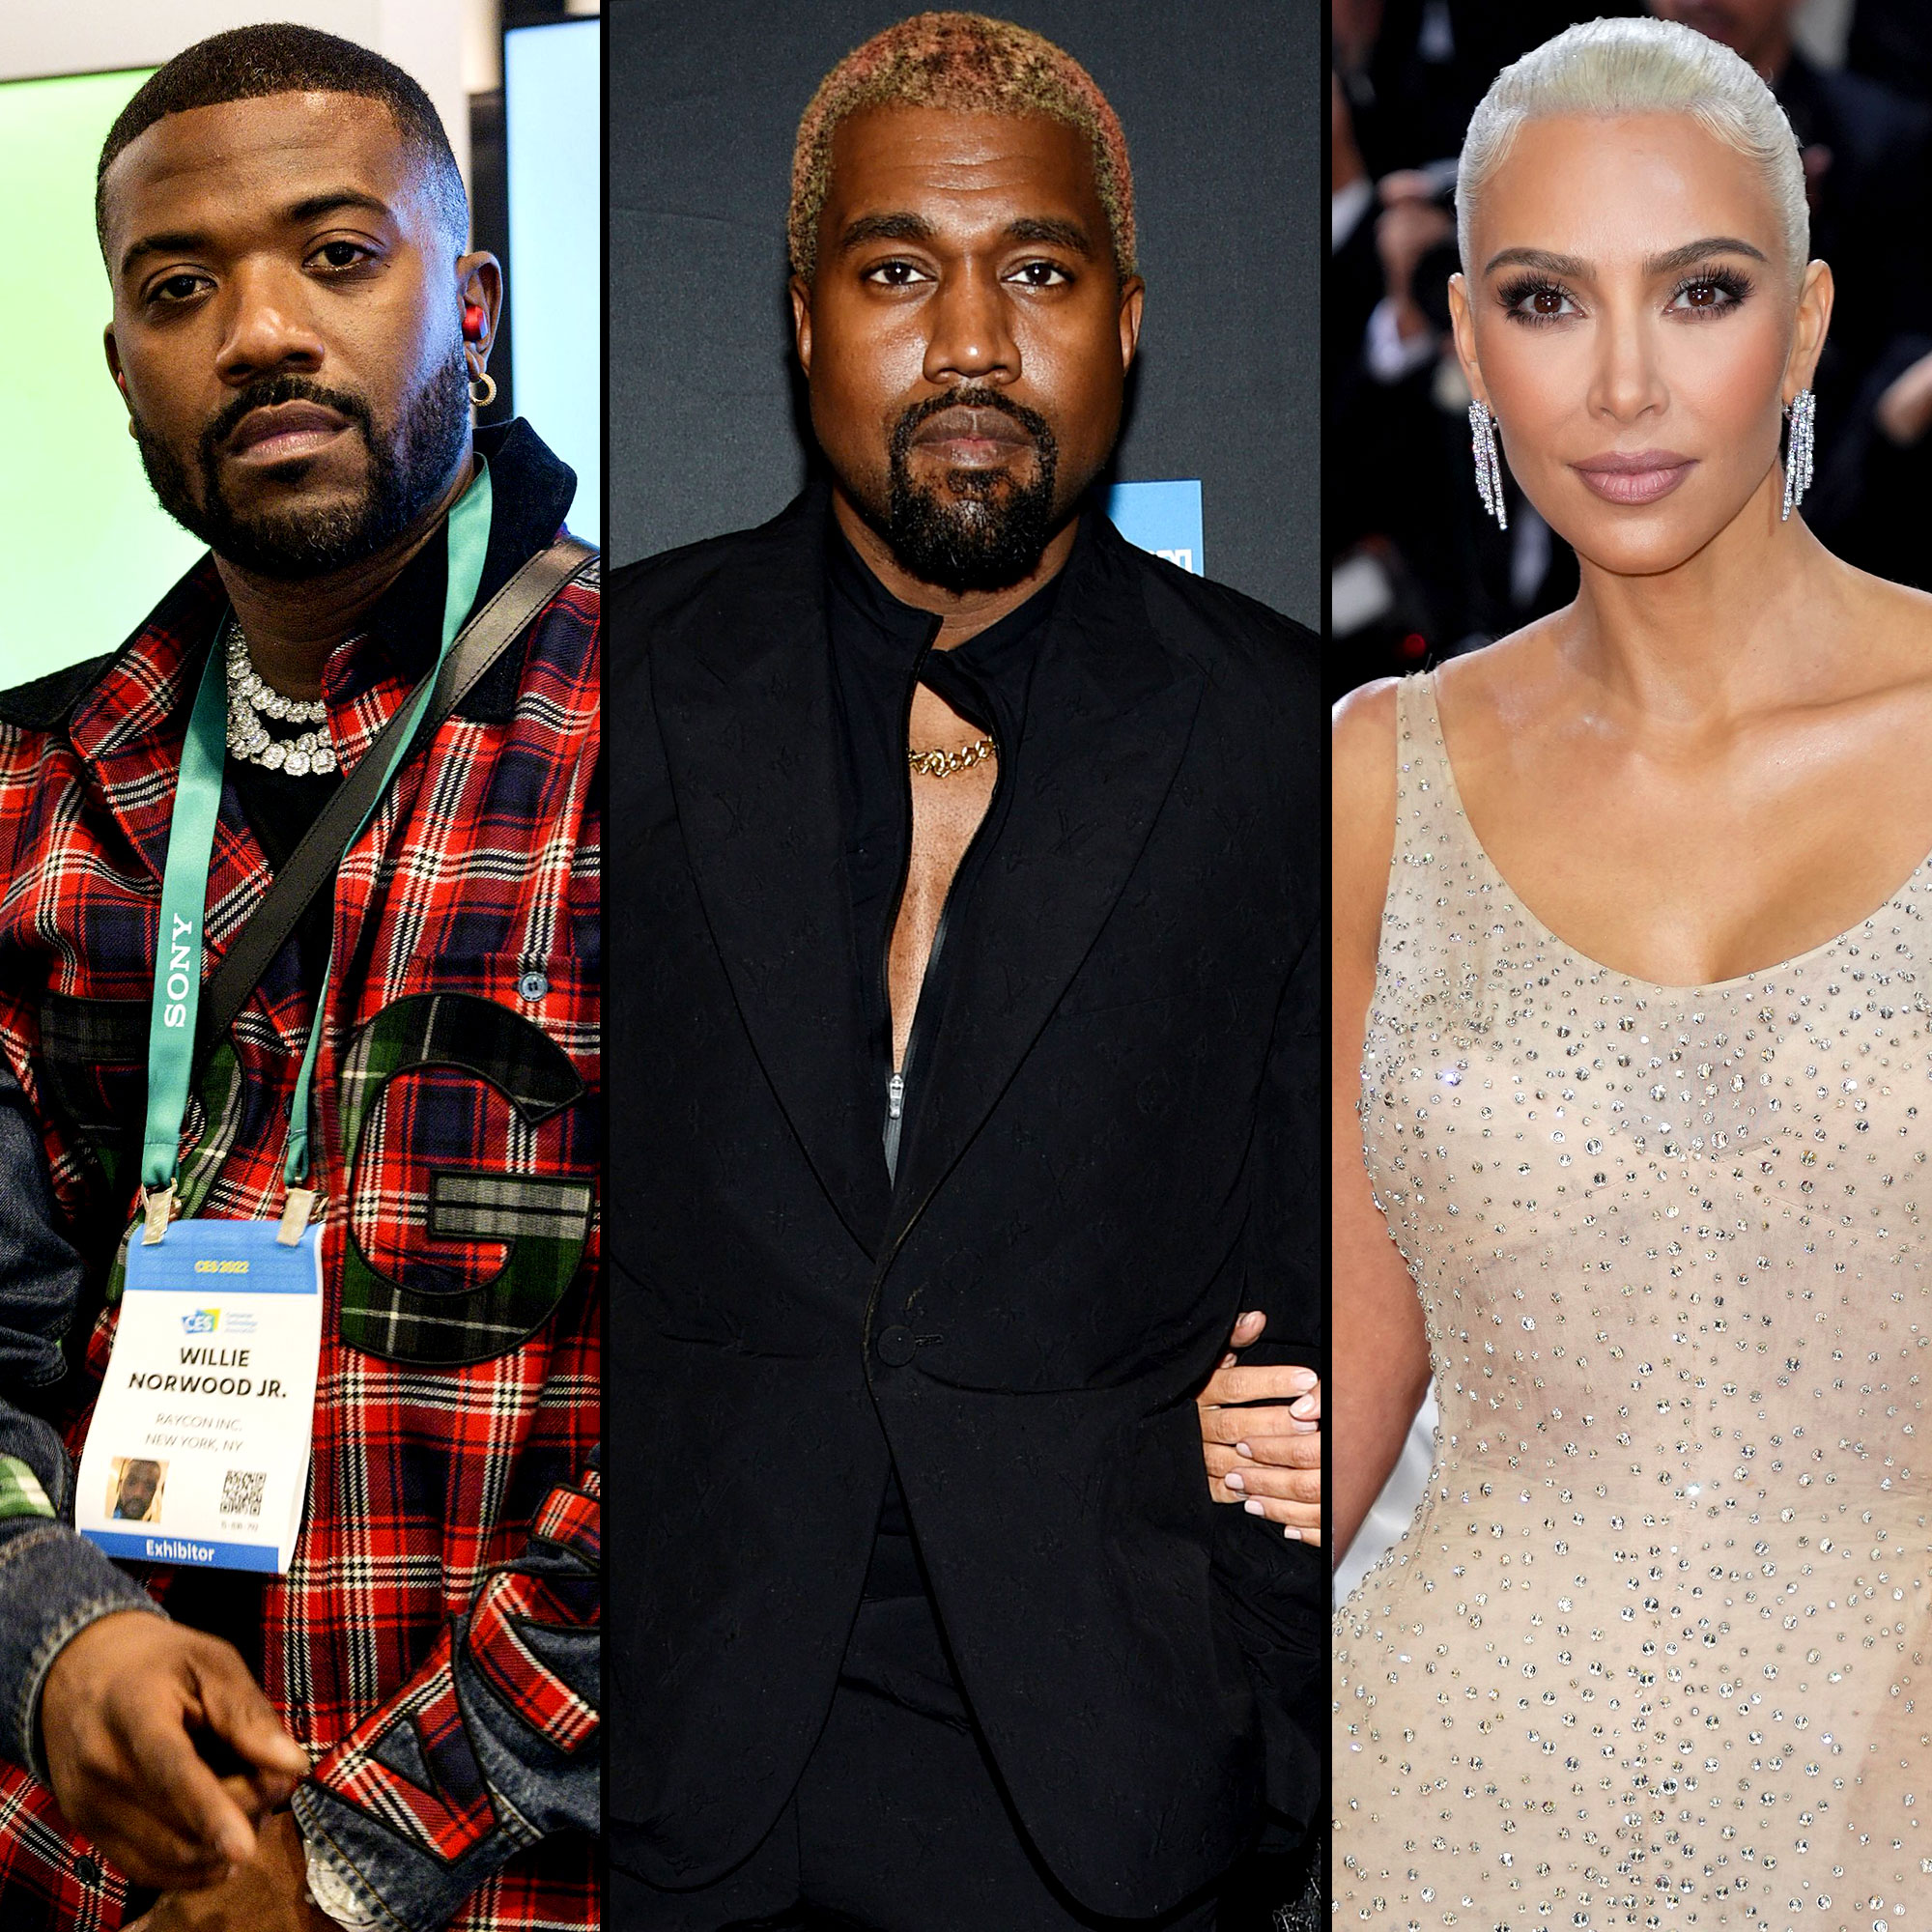 Ray J Details Meet-Up With Kanye West Over Kim Kardashian Sex Tape photo